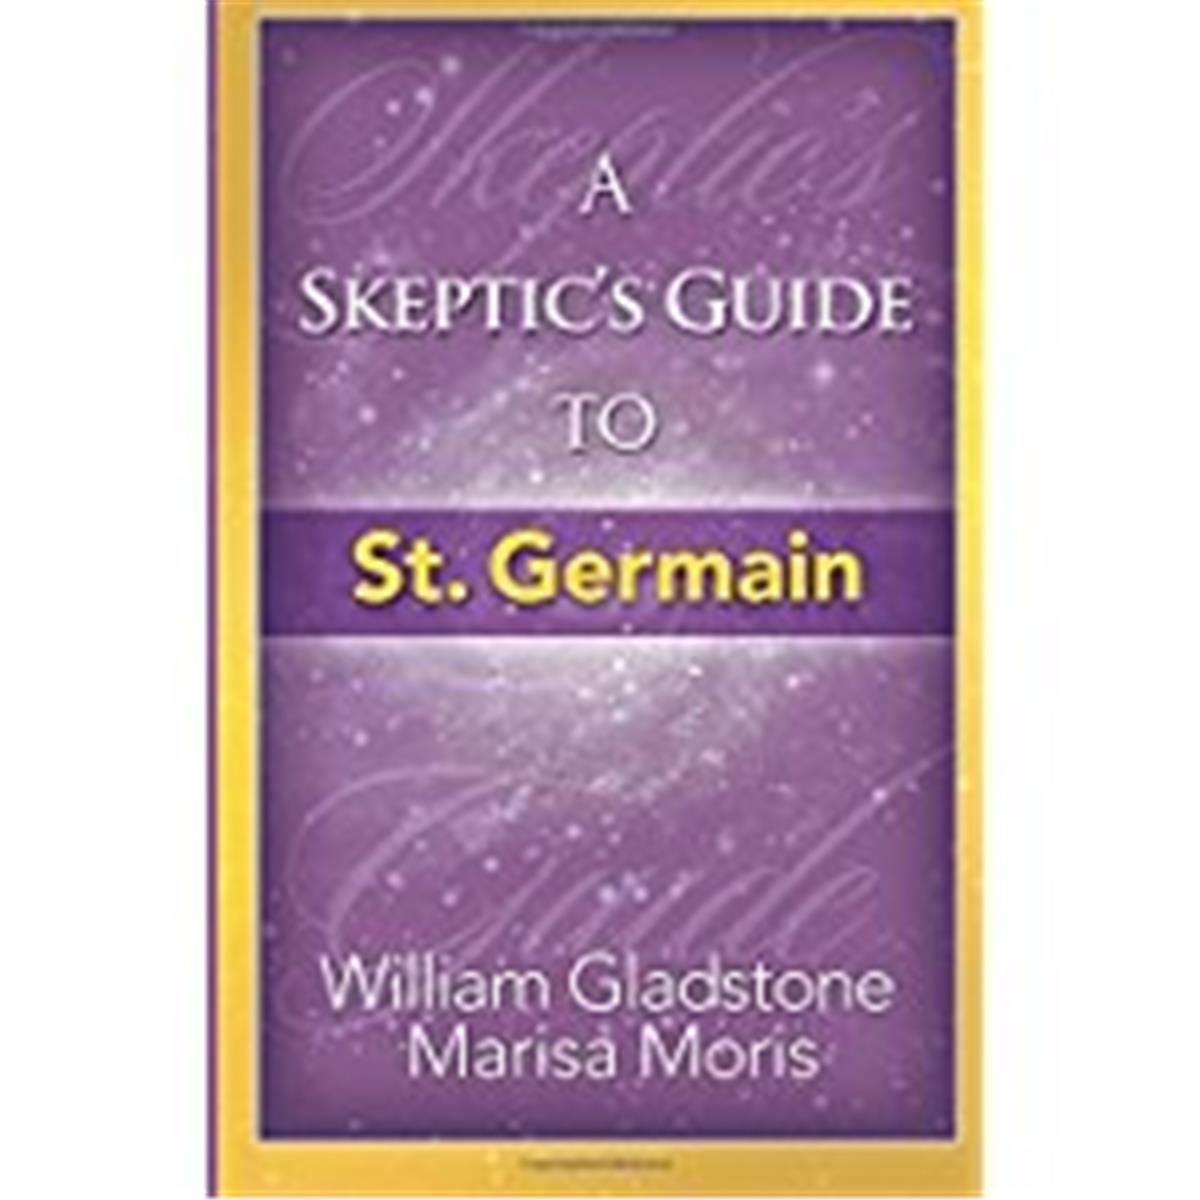 Picture of Blackstone Audio 9781982517601 A Skeptics Guide To St. Germain